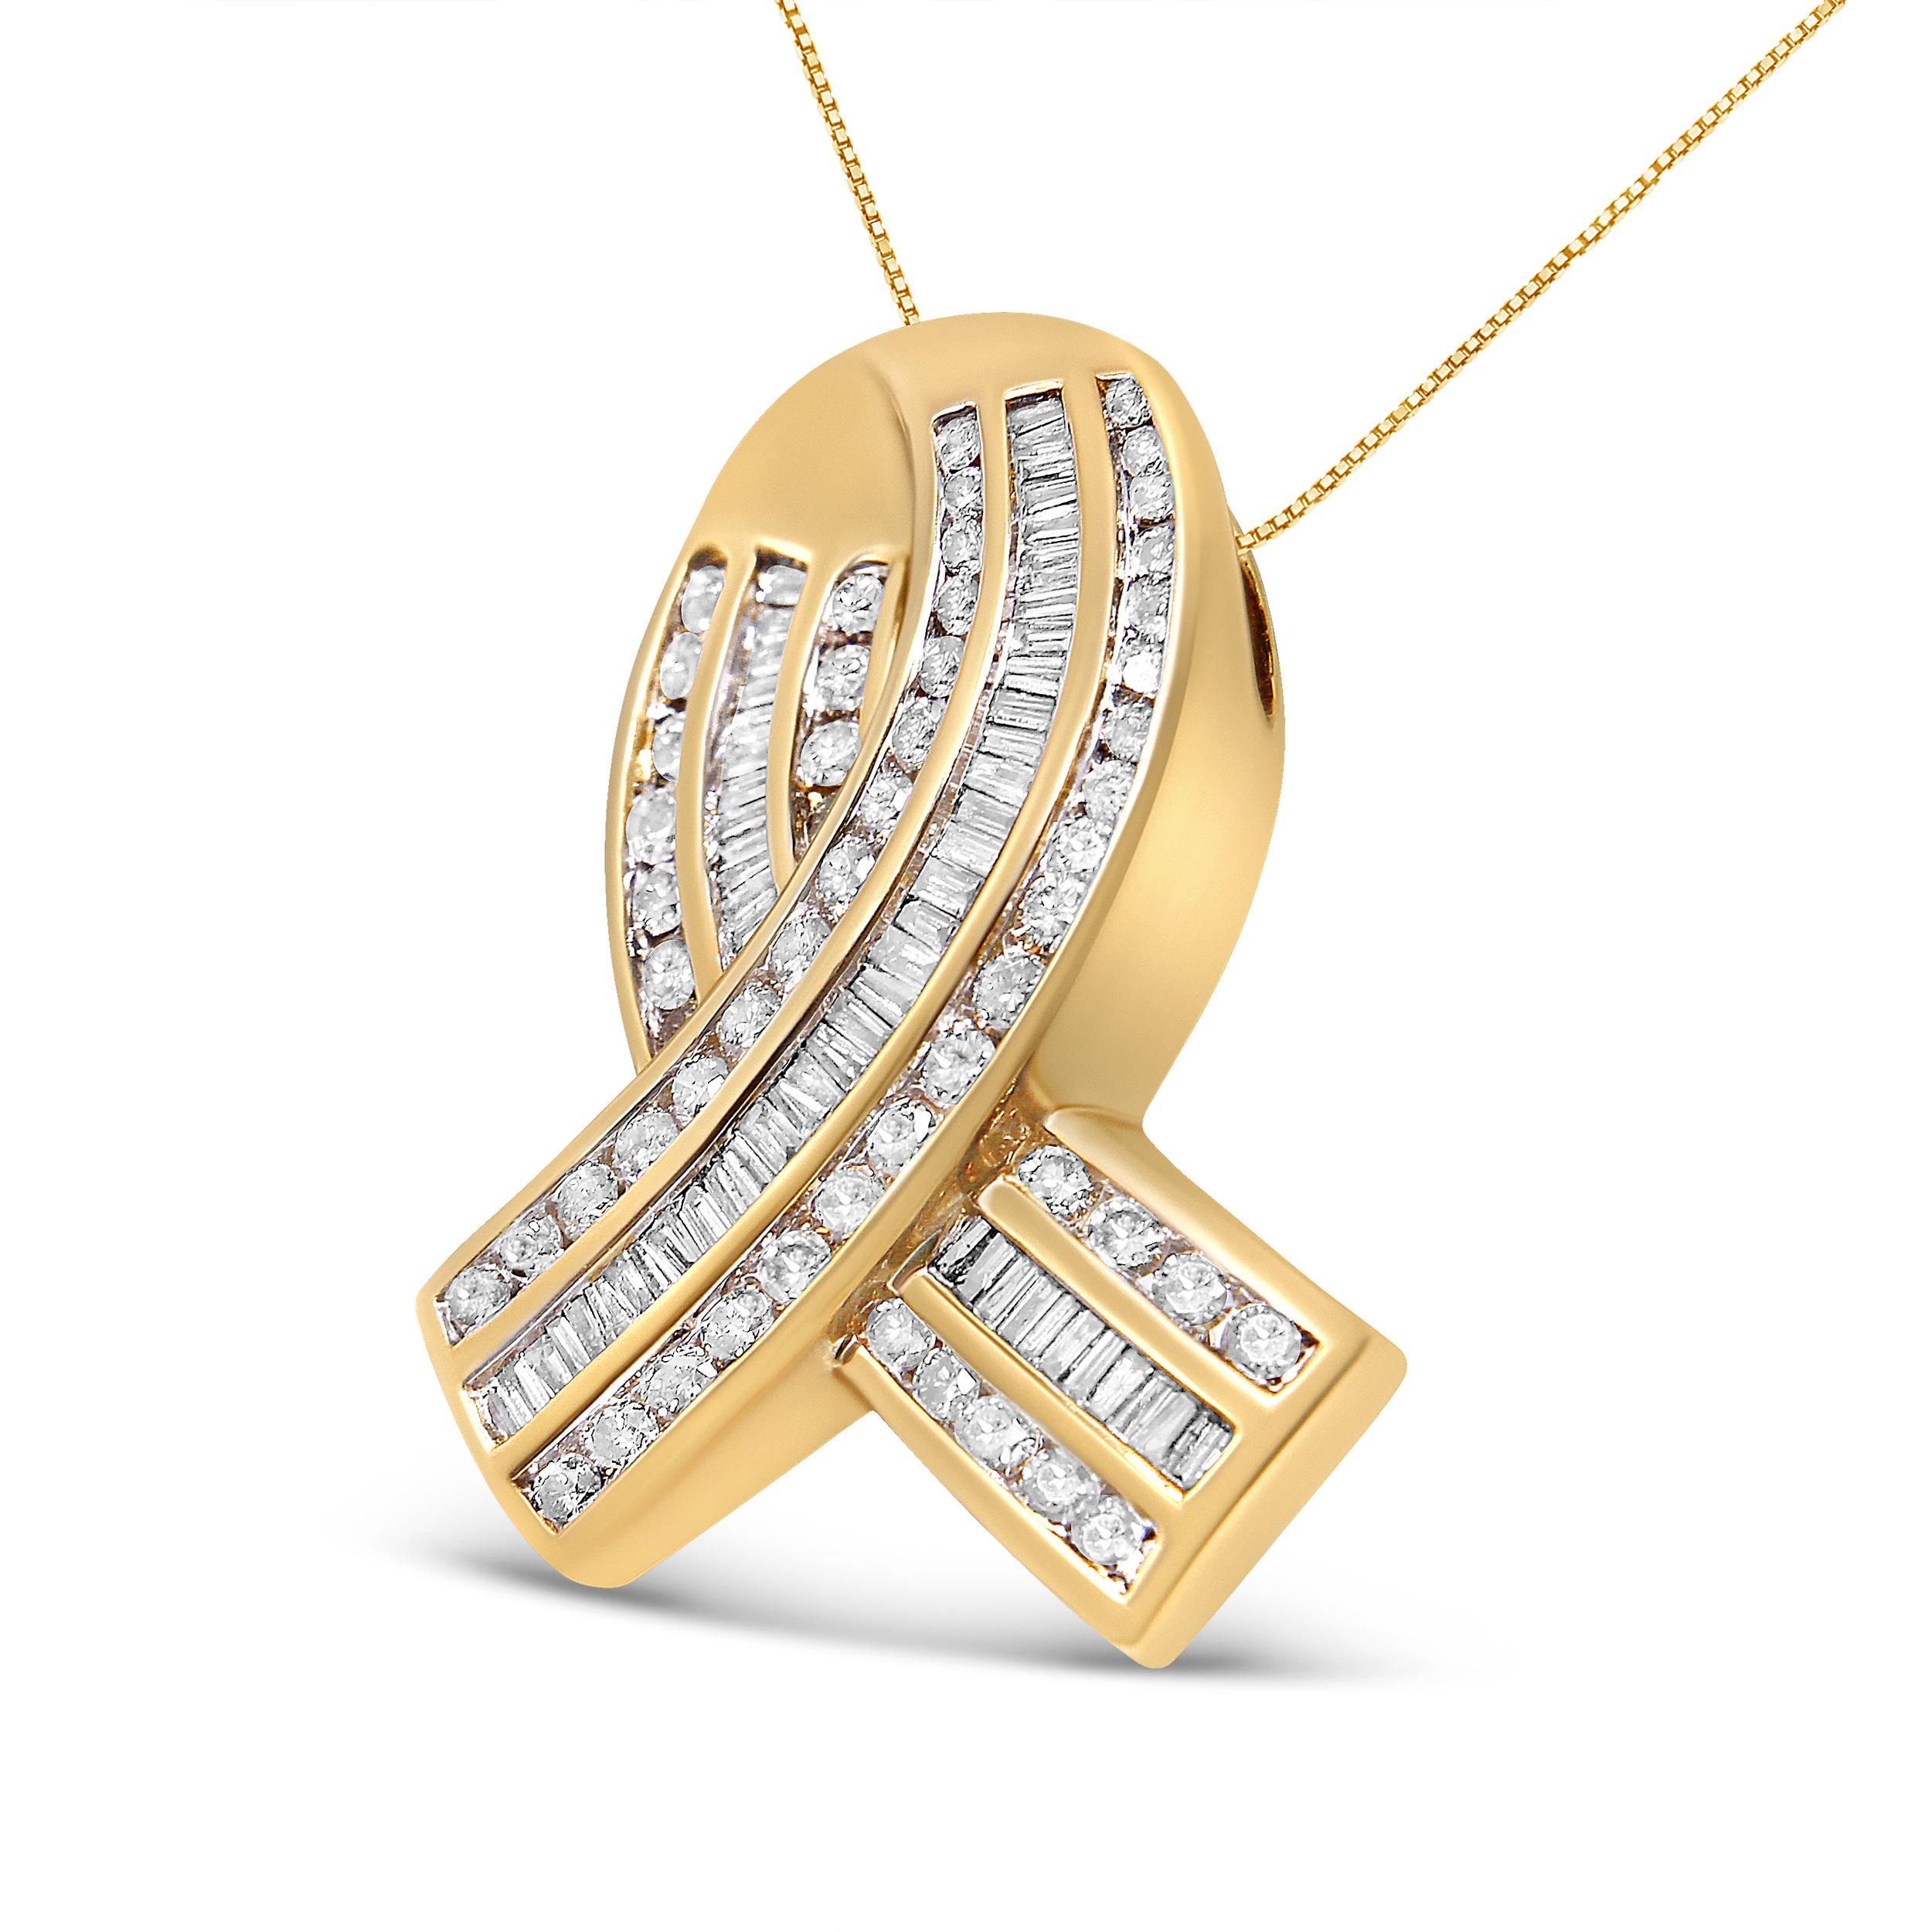 This gorgeous 14k yellow gold pendant necklace features 2 5/8 cttw of beautiful, natural round and baguette diamonds across three rows on either side coming down the ribbon. On either side of the ribbon sits two rows of round-cut diamonds with a row